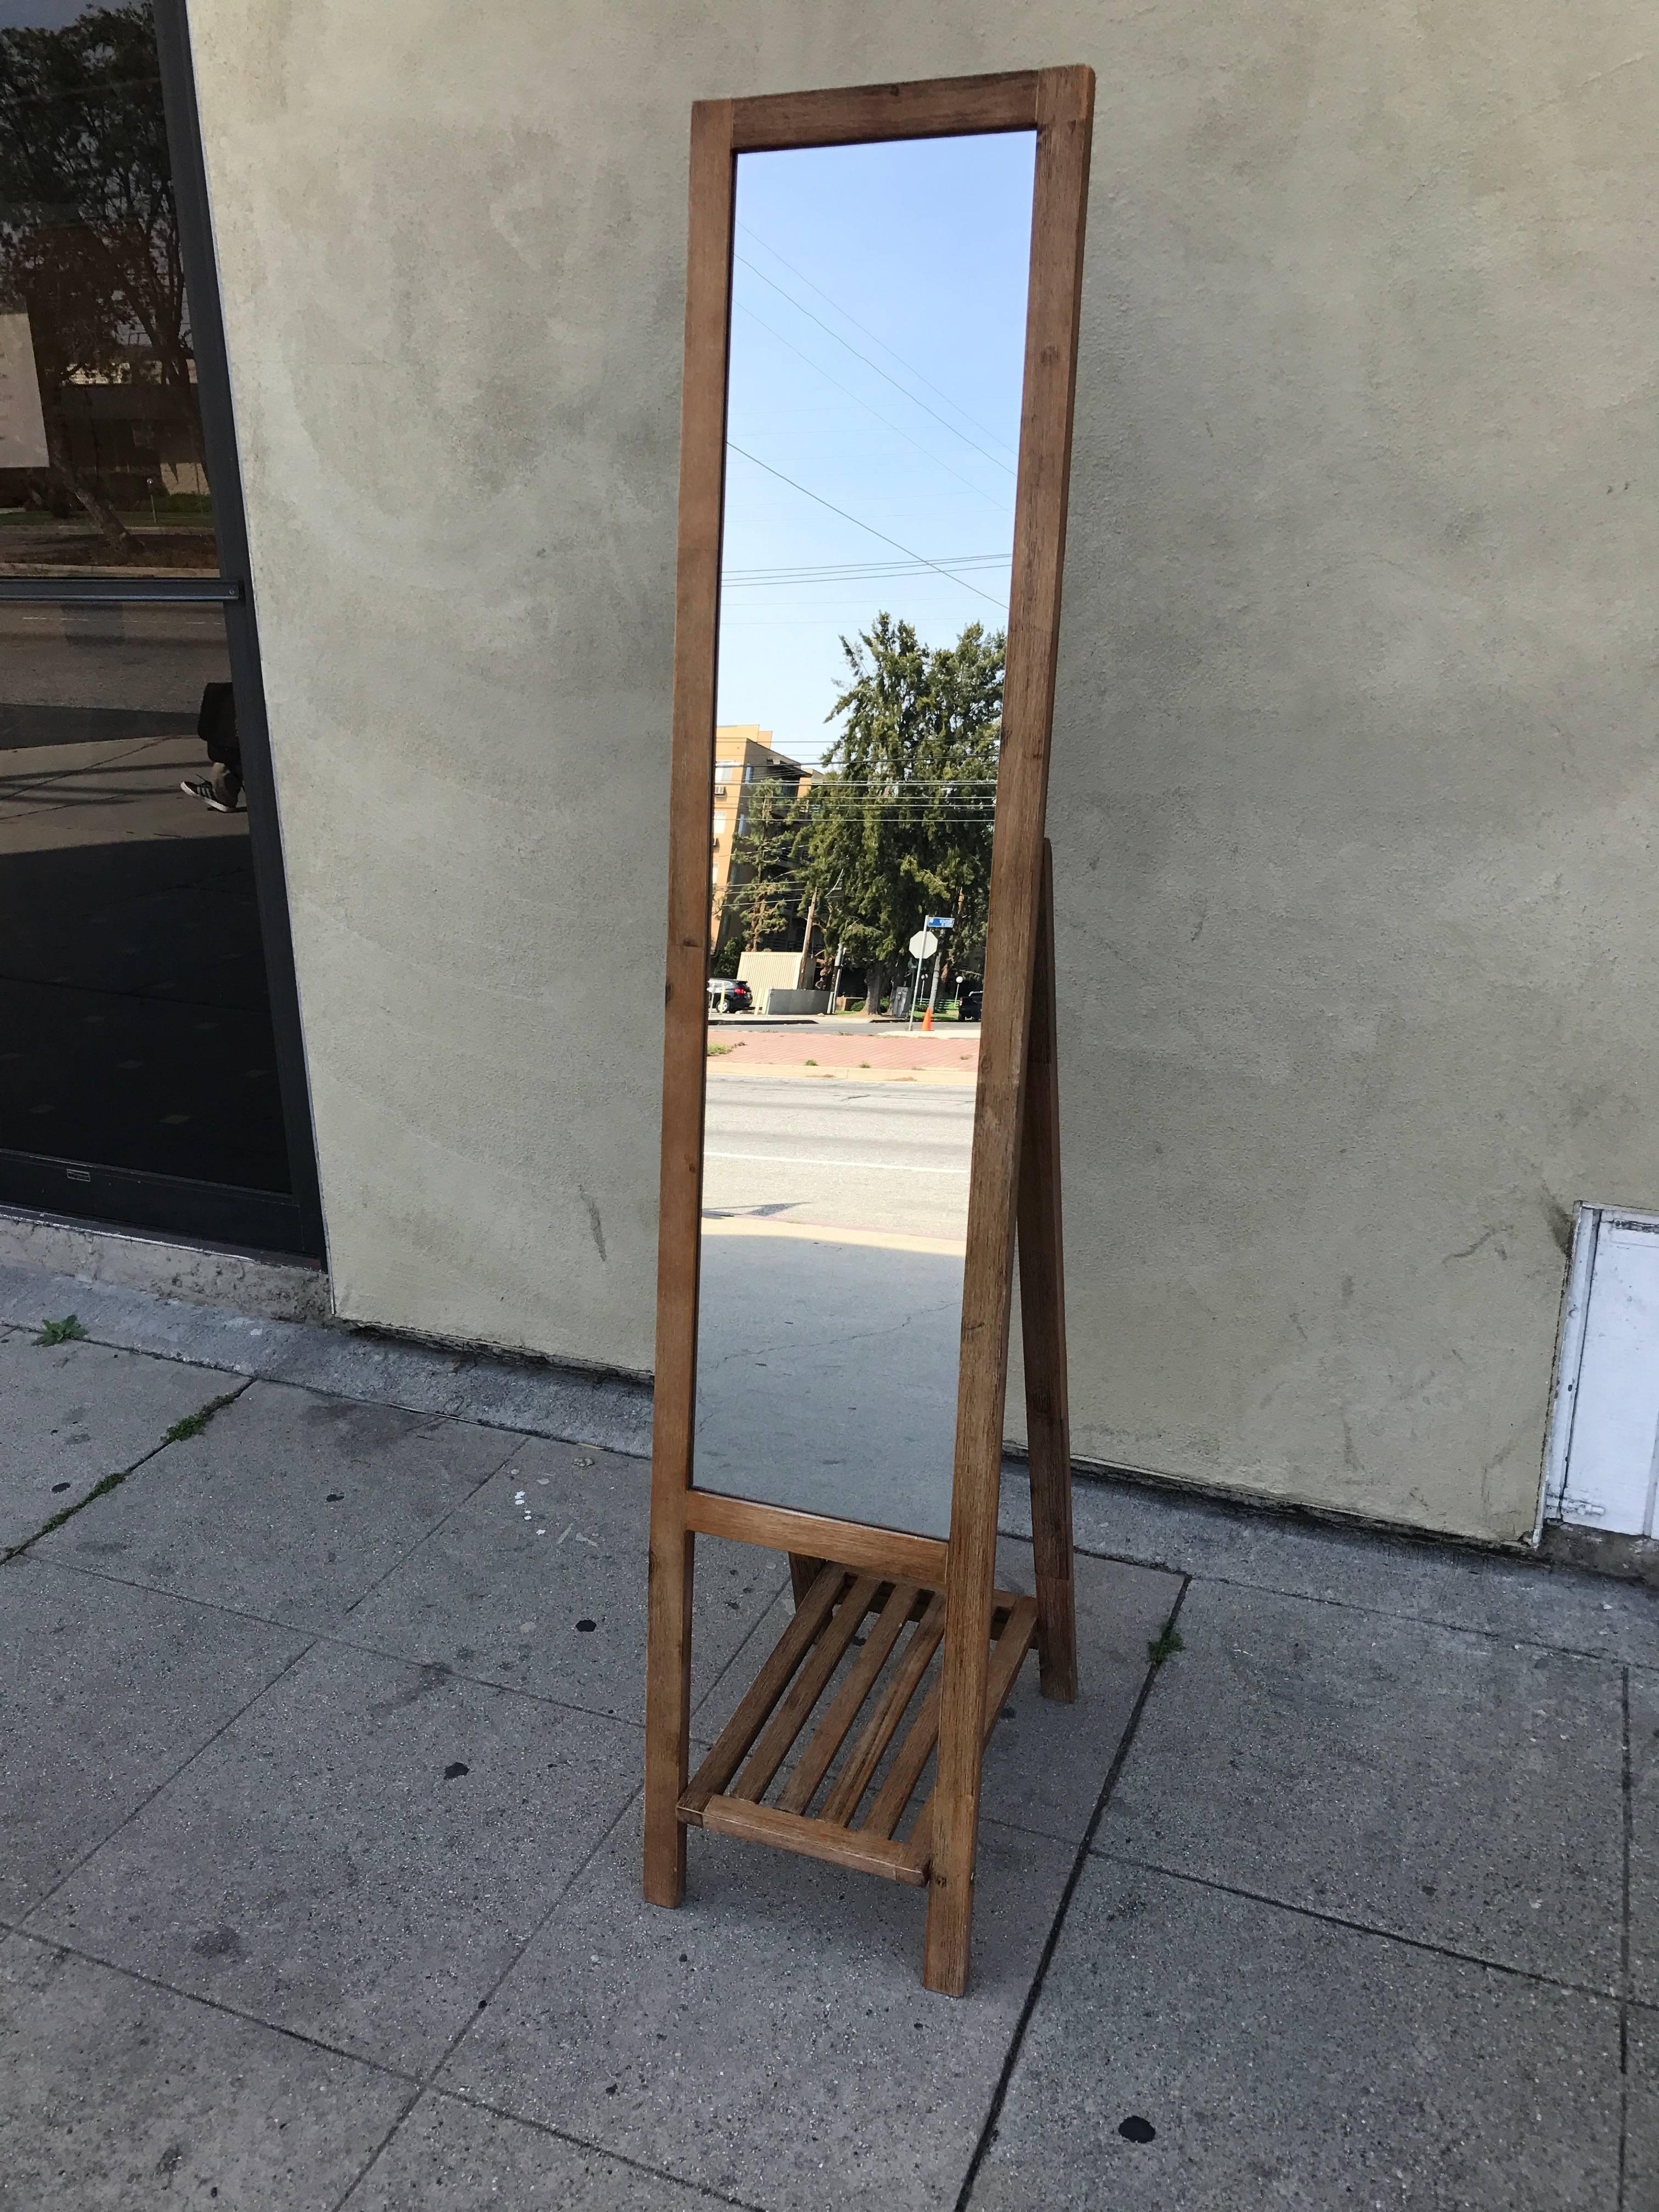 Standing oak mirror with slatted bottom shelf. Looks like an easel style and it is fordable.